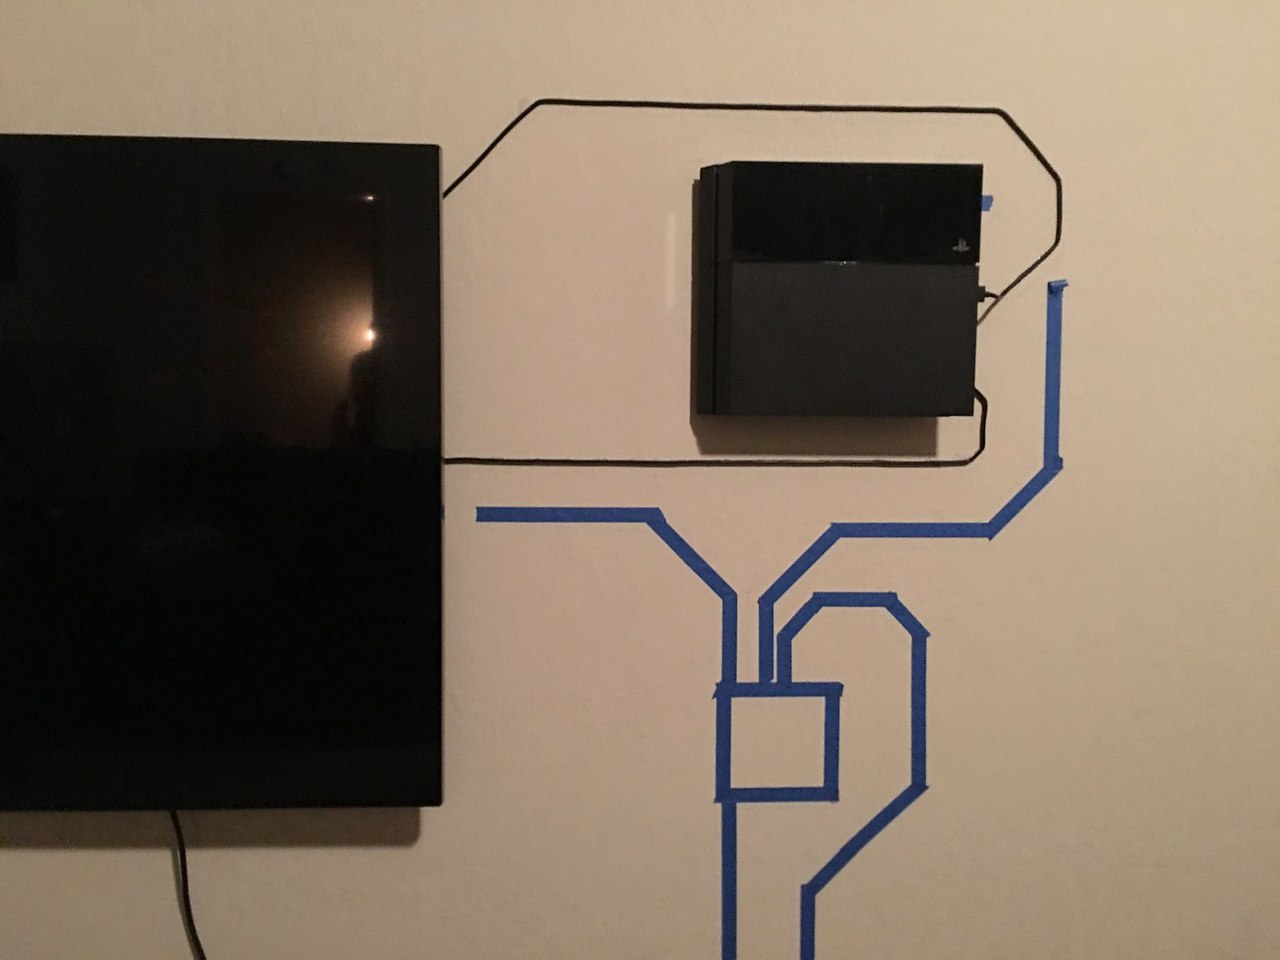 Playstation connect and install on wall